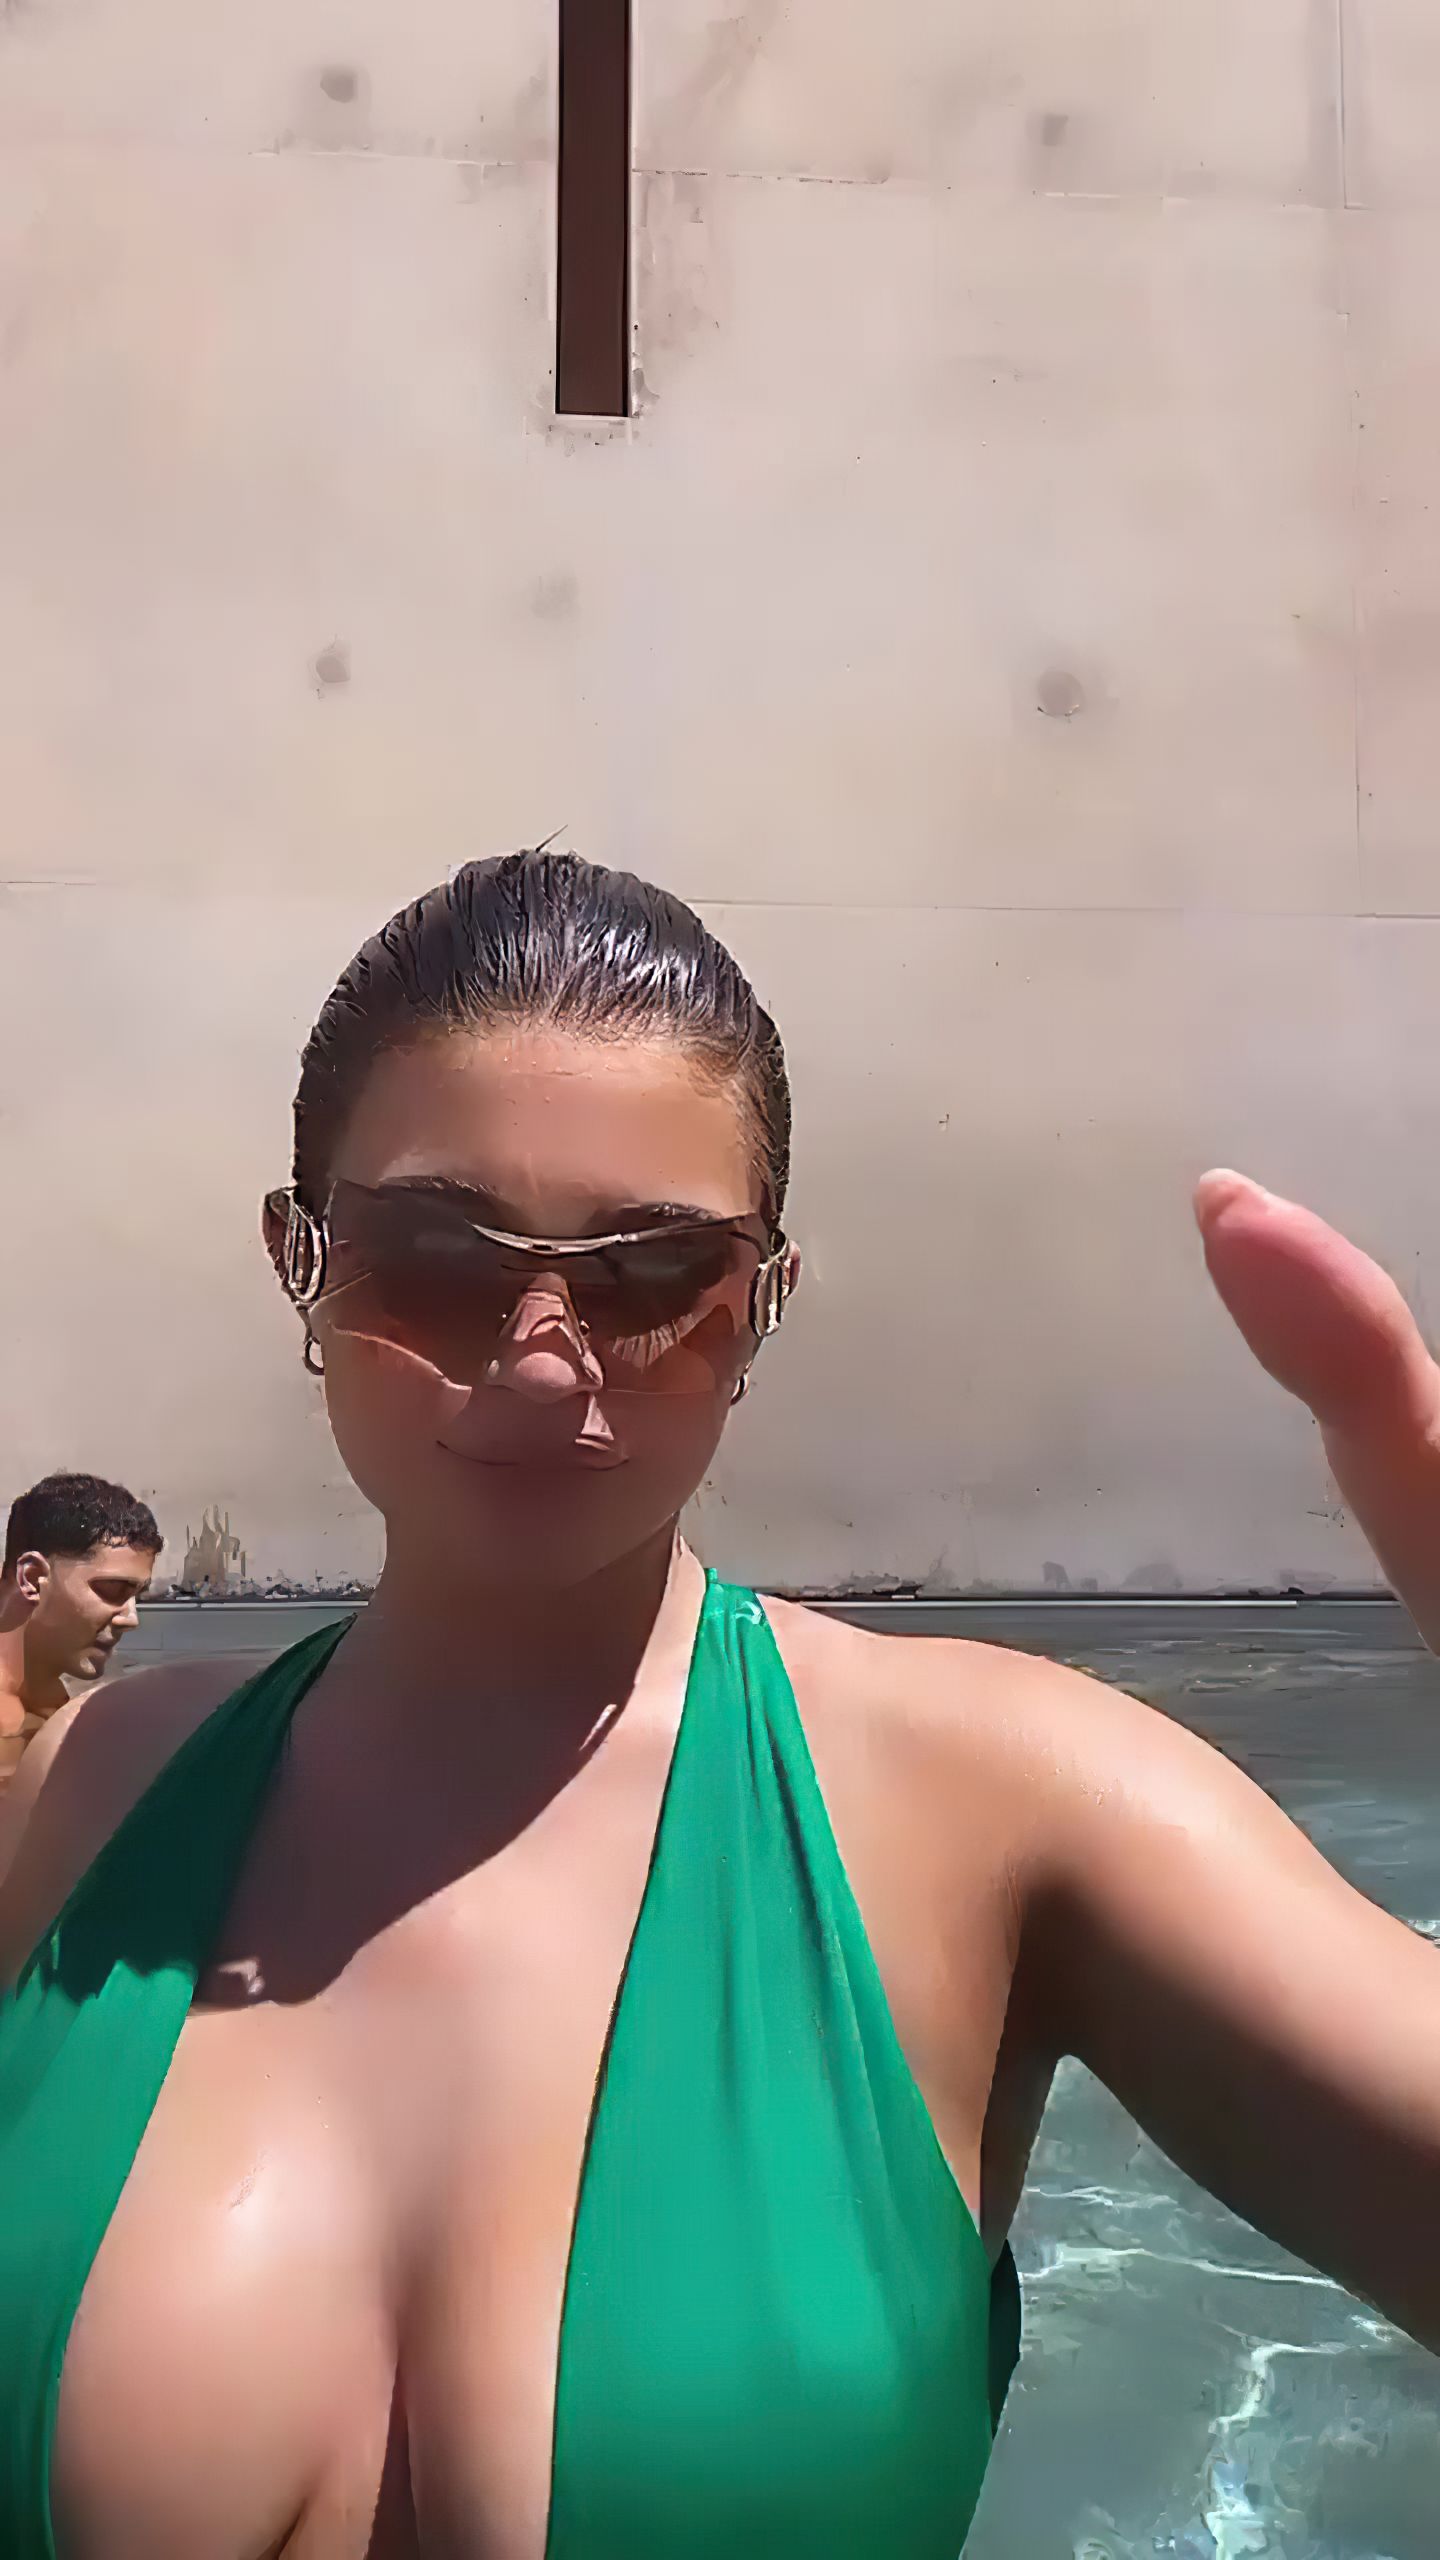 Kylie Jenner Shows Off Her Big Boobs in a Pool (21 Pics+ GIFs & Video)